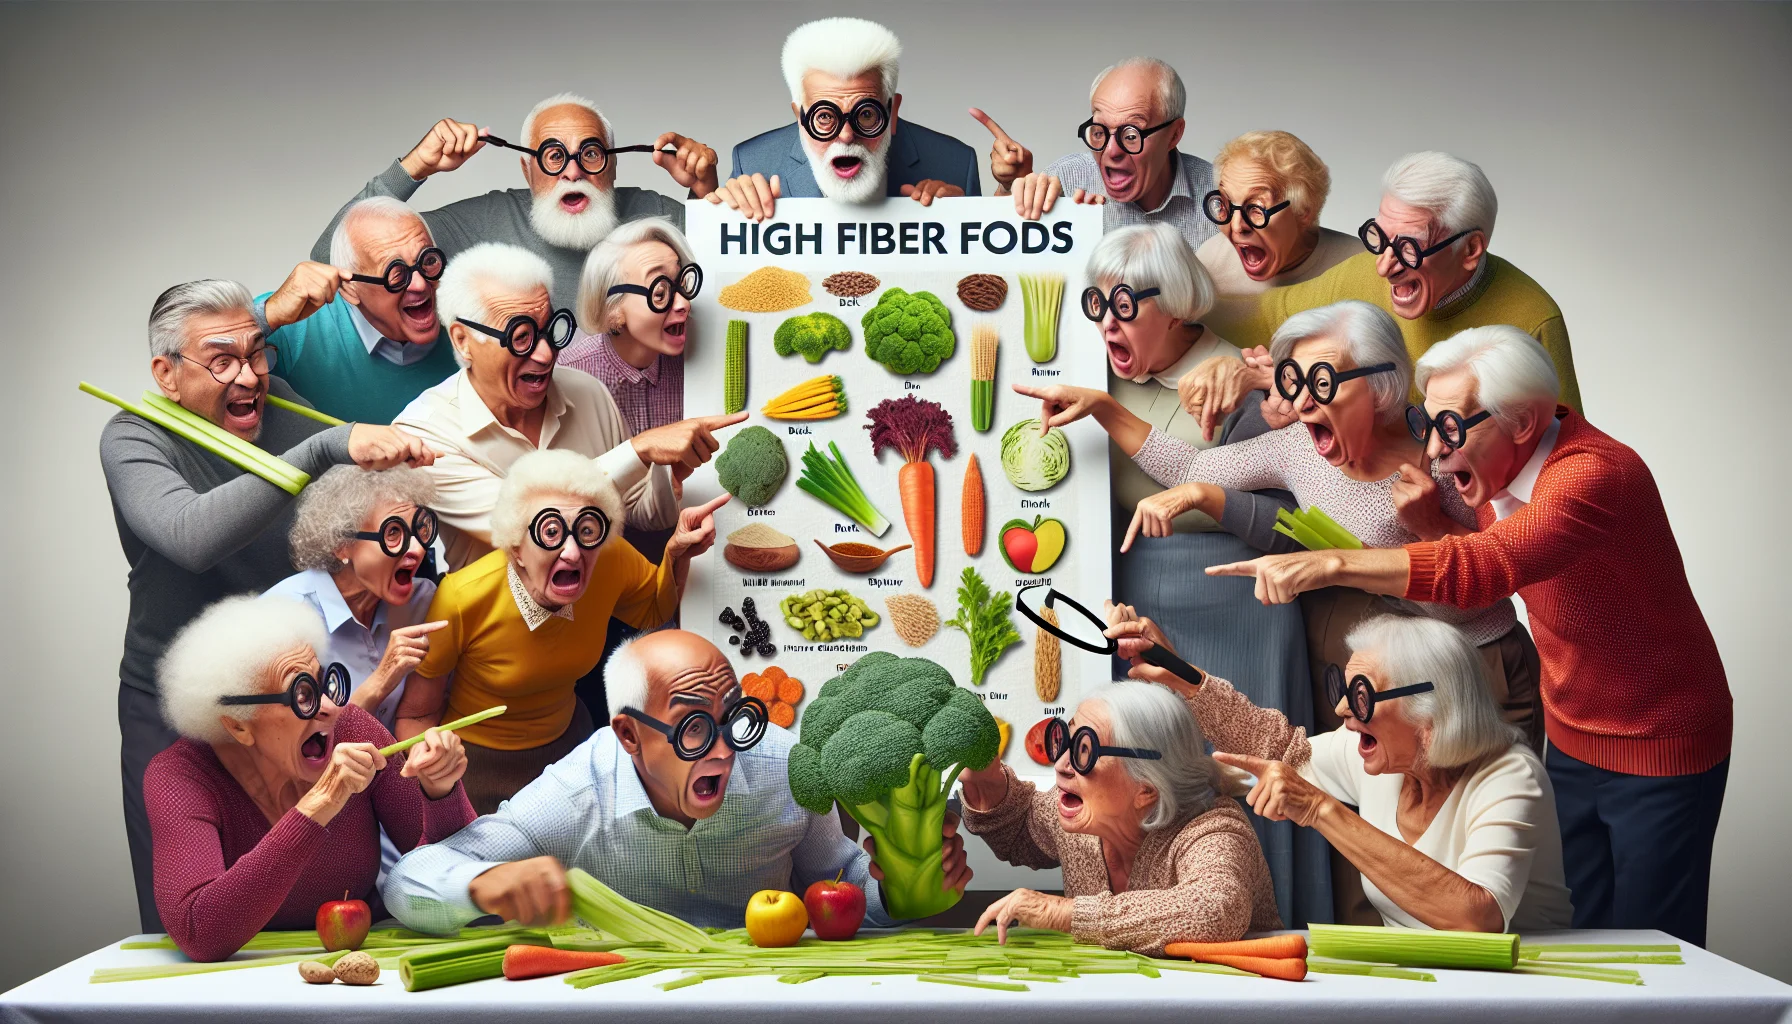 A humorous, yet realistic image showing a group of senior citizens, of various descents such as Caucasian, Hispanic, Black, Middle-Eastern, and South Asian all gathered around a large chart displaying high fiber foods. They are eagerly pointing and laughing at the chart. One senior gentleman seems to have brought a magnifying glass to read the fine print, while a lady nearby is comically attempting to chew on a raw broccoli. Some seniors are playfully fighting over a huge celery stick, and others are wearing glasses with frames made of carrots for fun, all exemplifying the benefits of a healthy, fiber-rich diet.